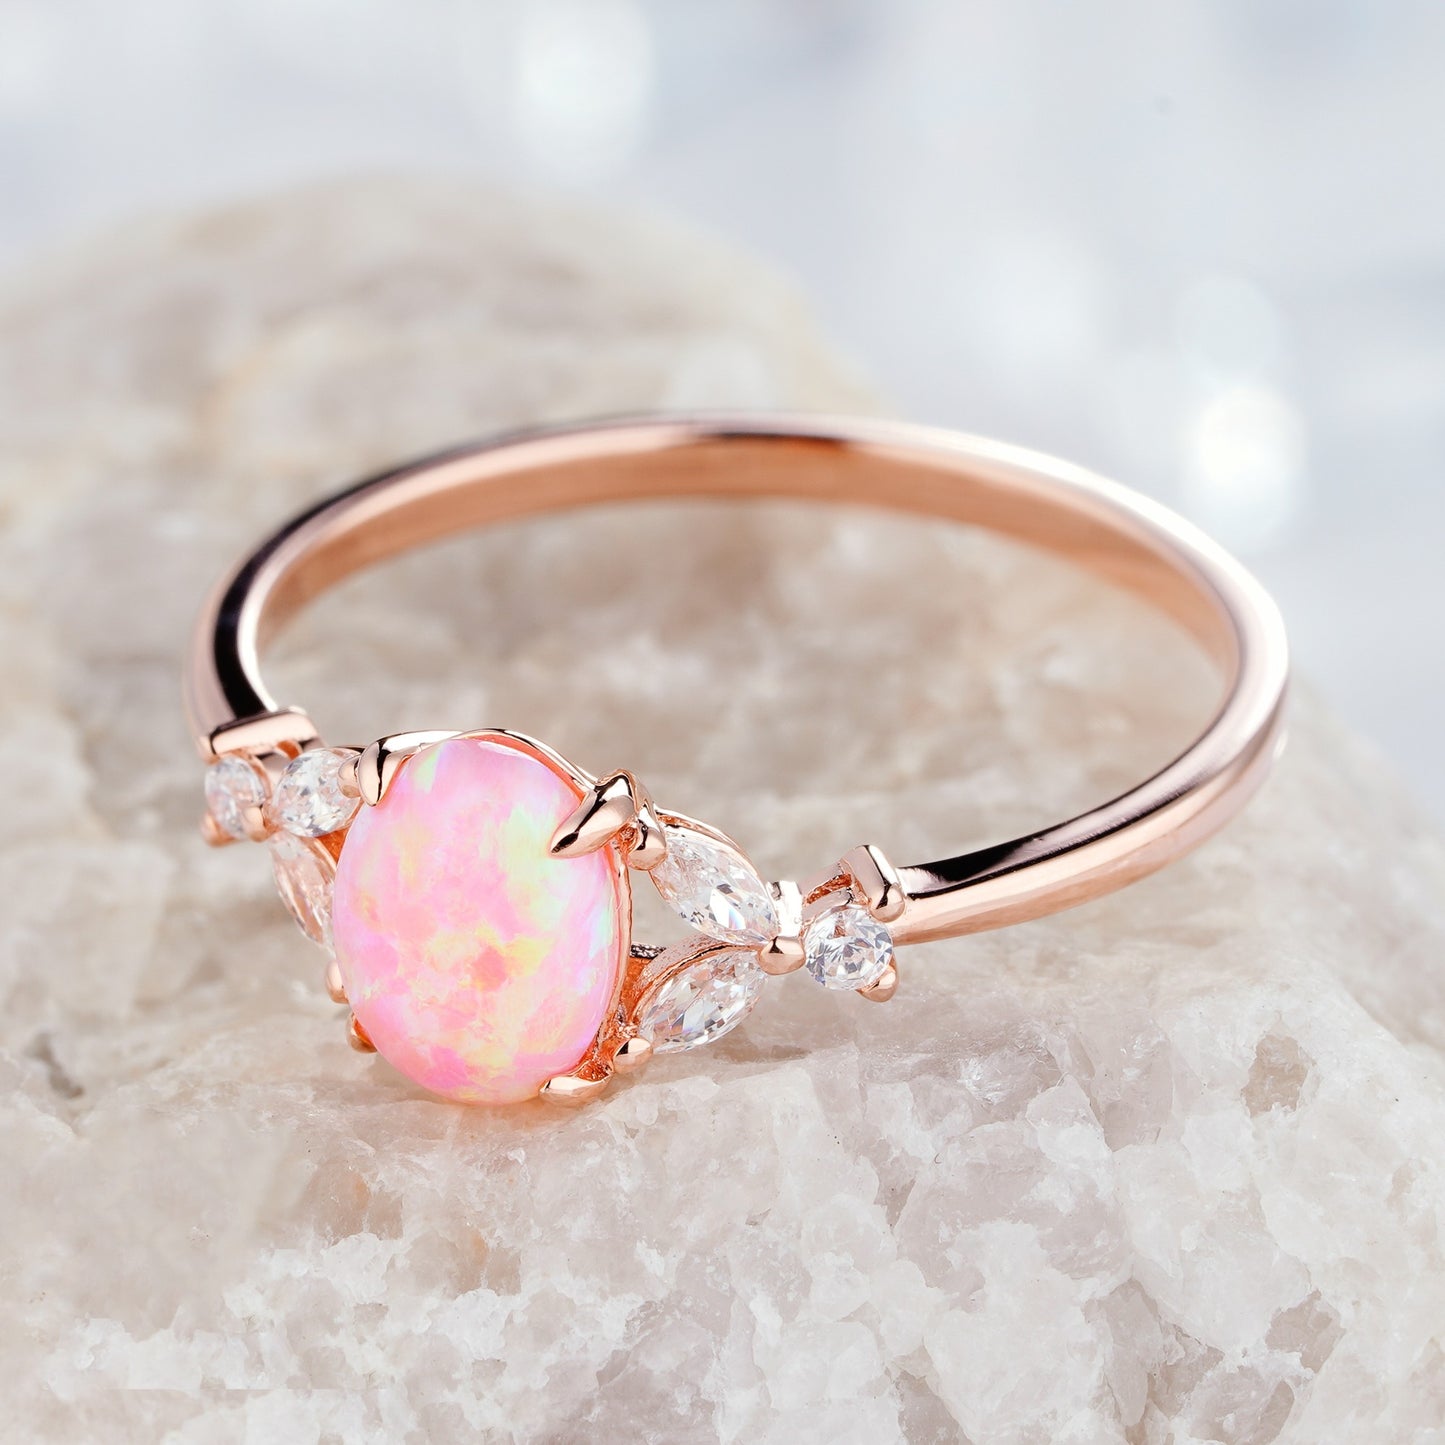 Oval Pink Opal Engagement Natural Diamond Promise Ring in 14K/18K Gold - ShainJewelry